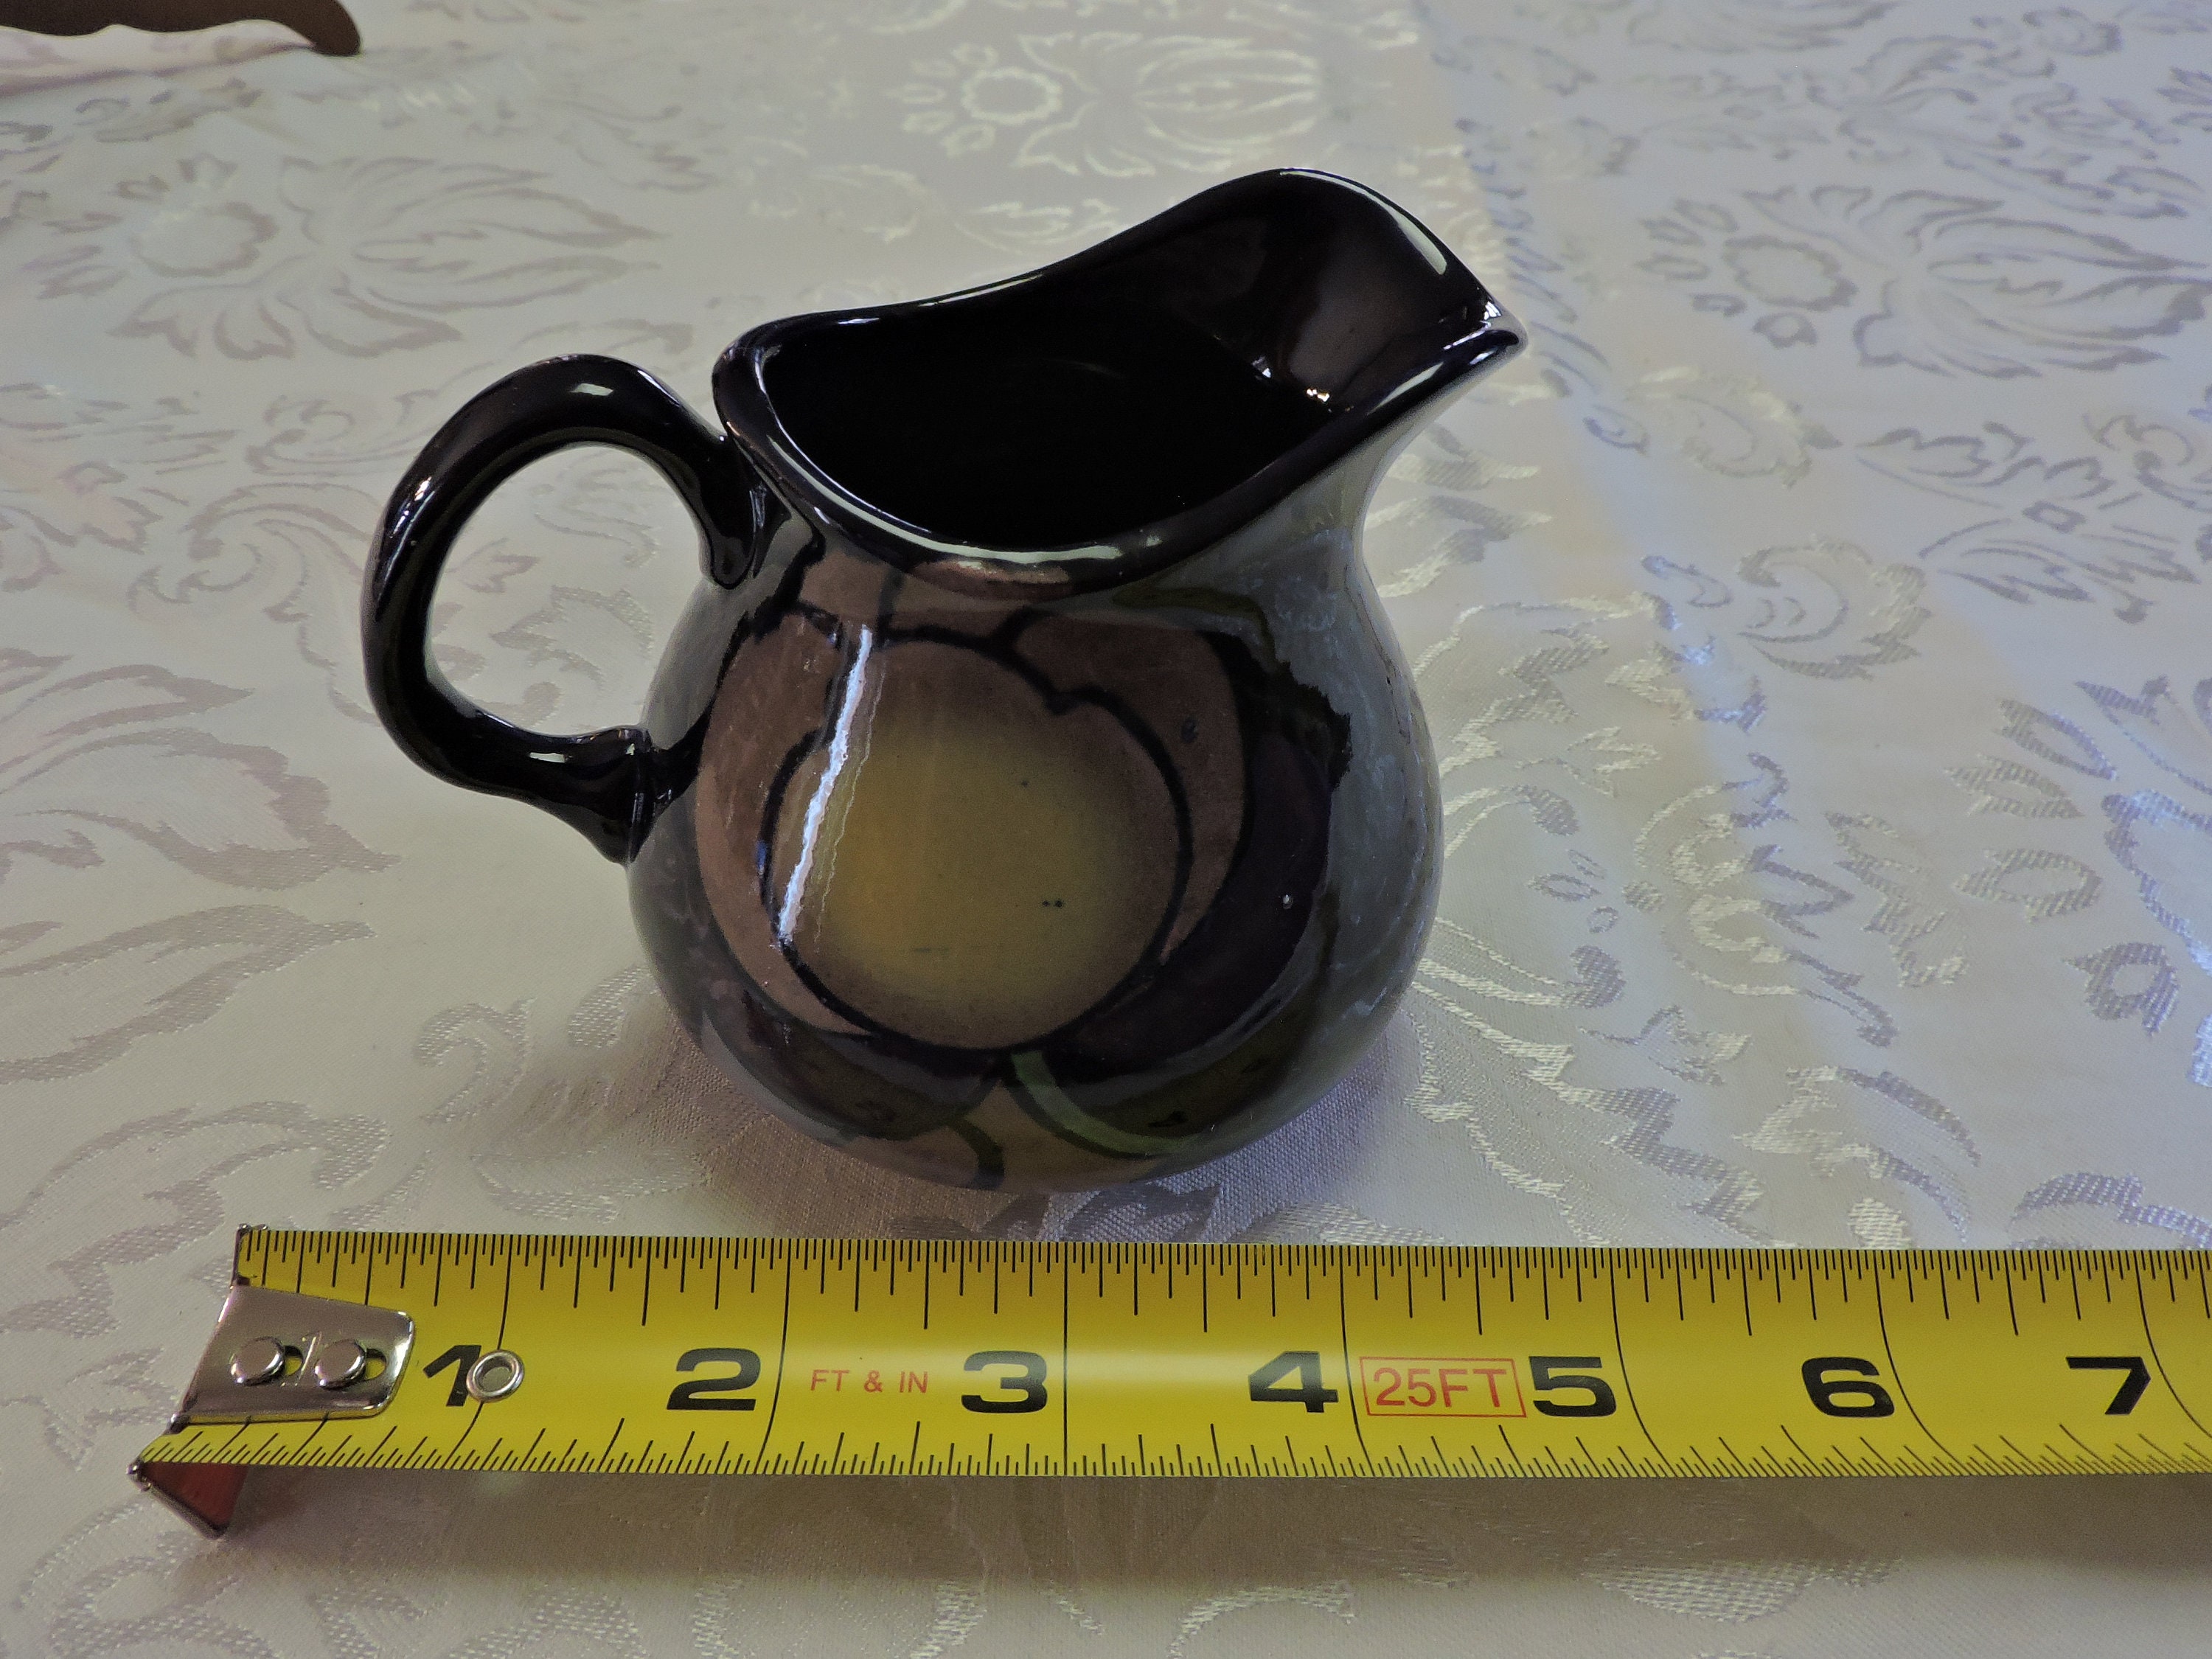 Early 1900s Early Colclough Royal Stanley Ware Pitcher and Stand - Set of 2